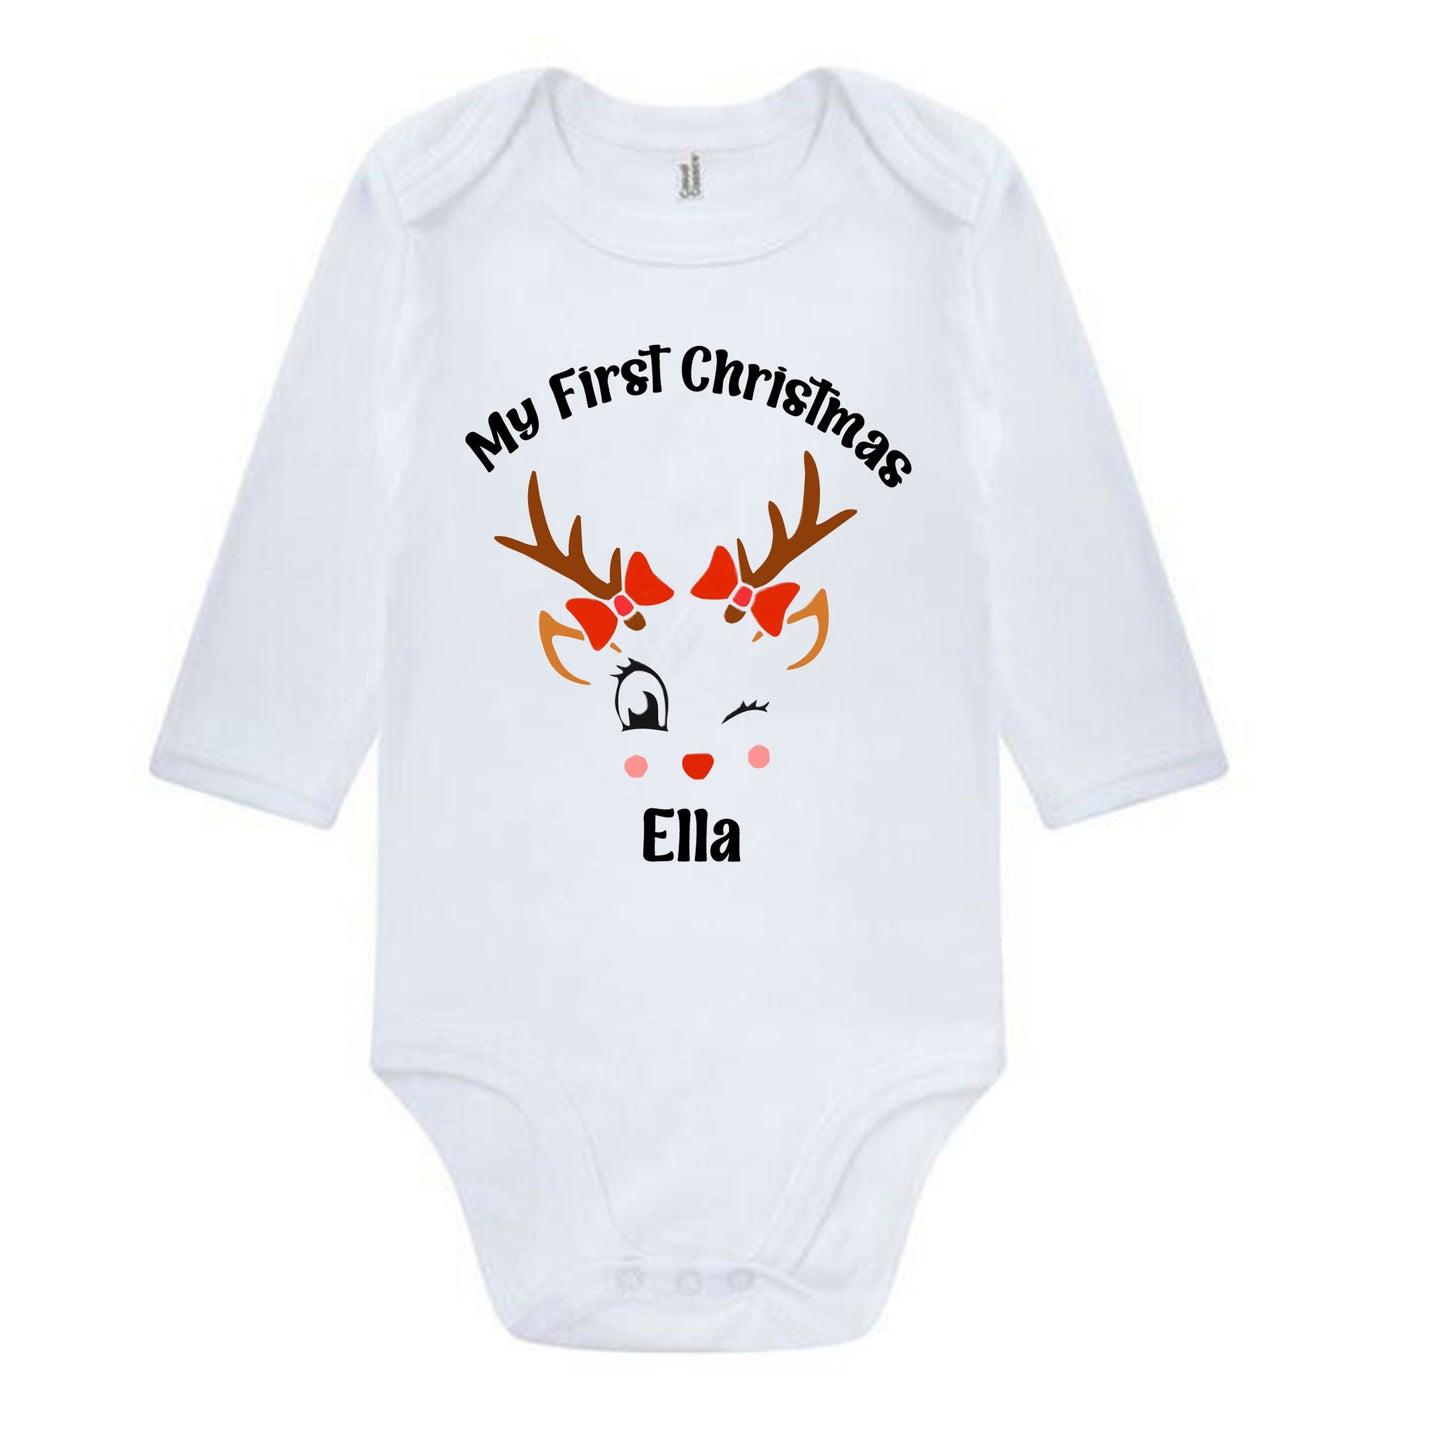 My 1st Christmas Outfit